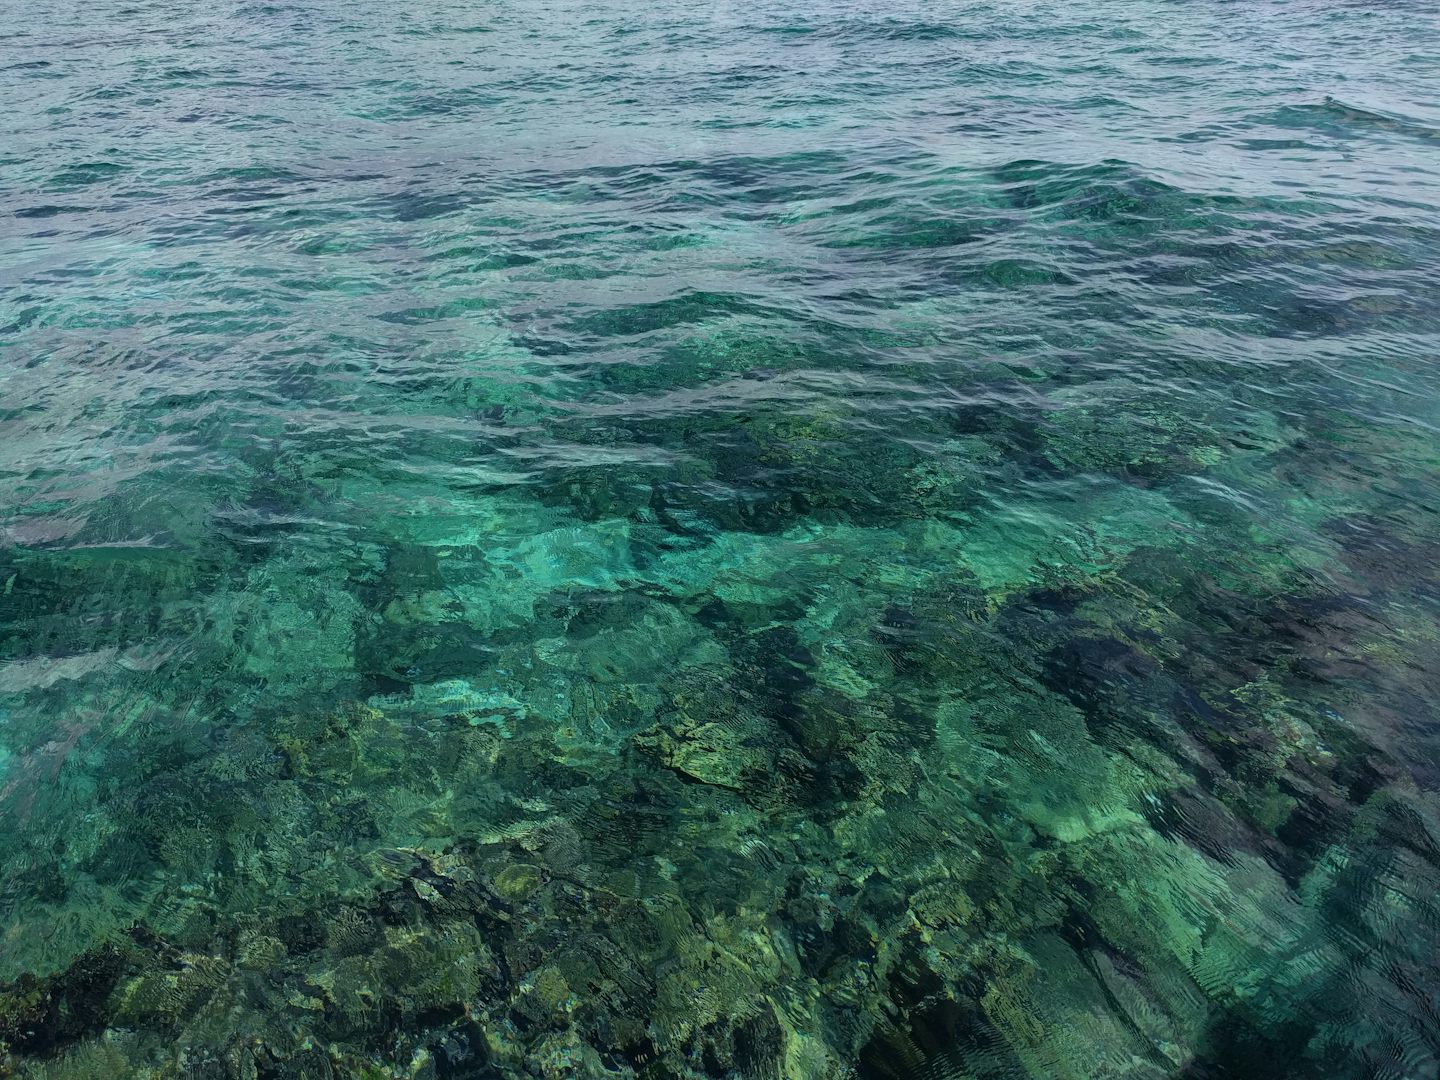 The water in Roatan was crystal clear